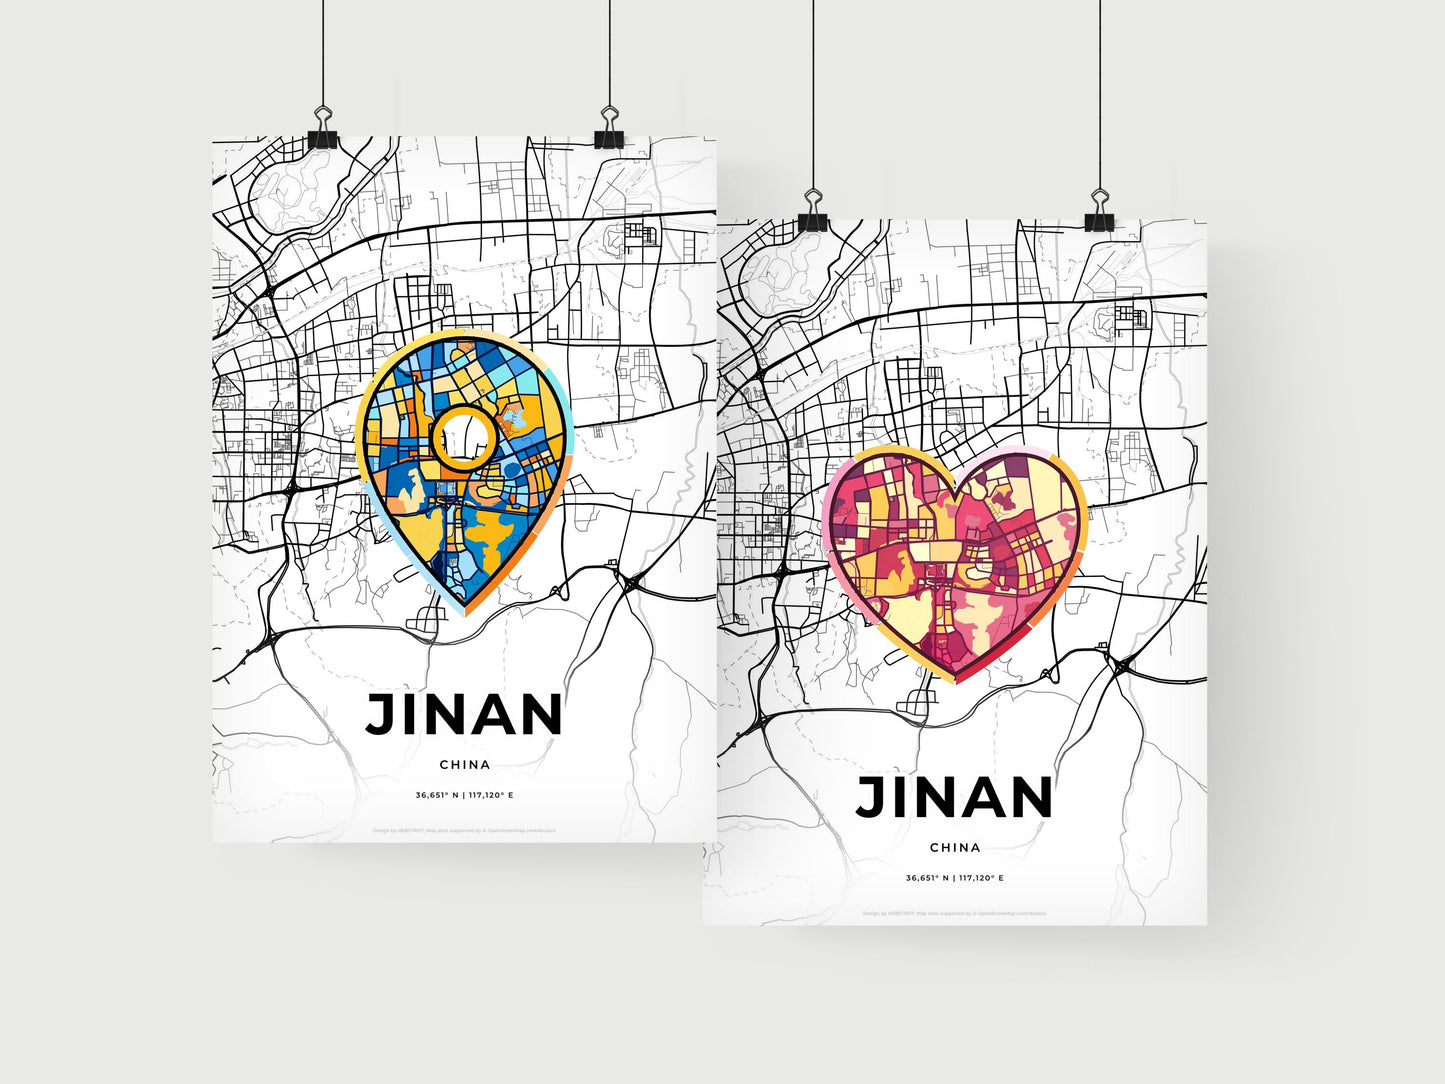 JINAN CHINA minimal art map with a colorful icon. Where it all began, Couple map gift.